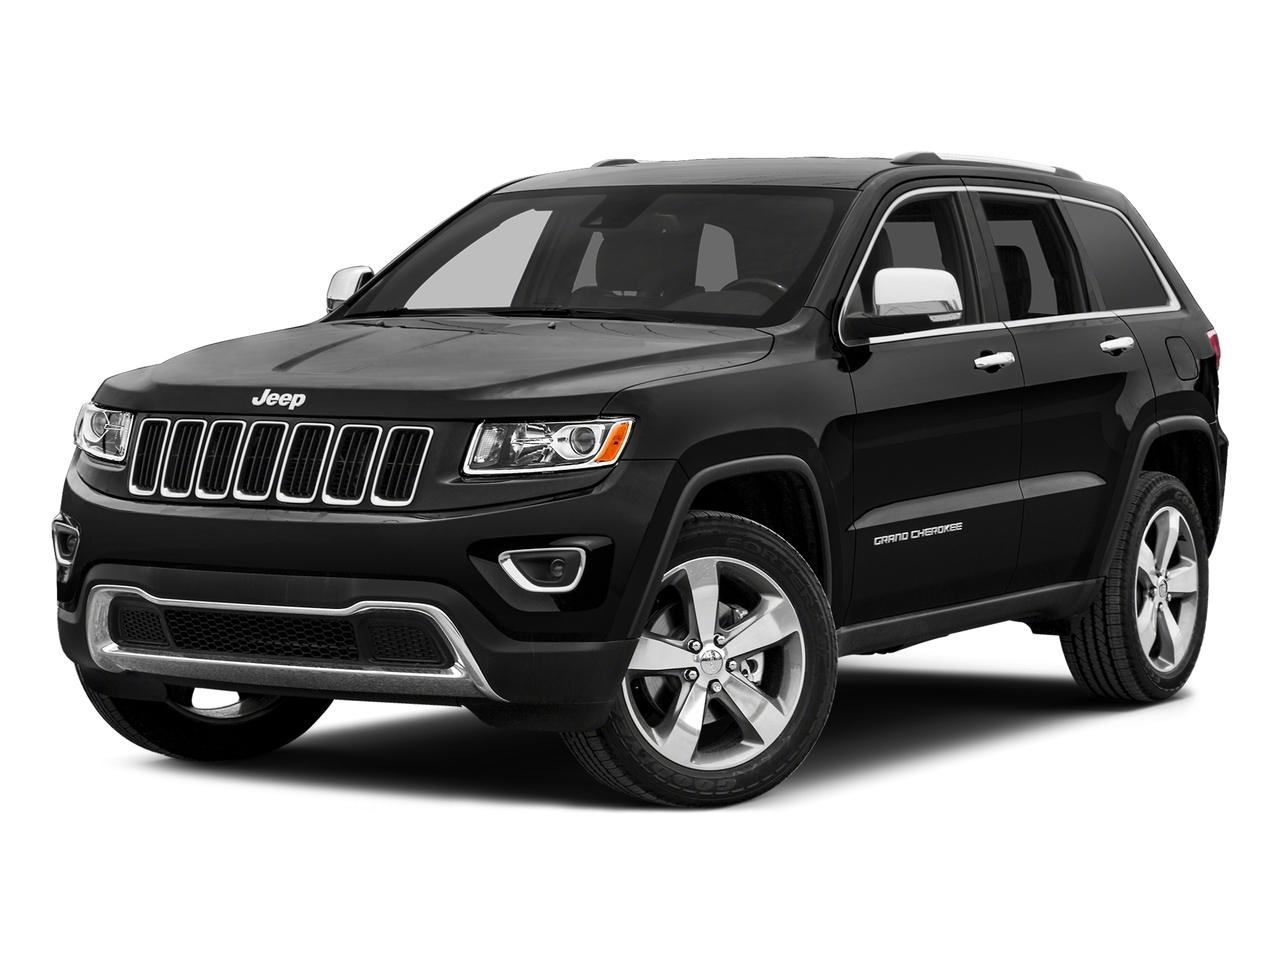 Used 2015 Jeep Grand Cherokee Altitude with VIN 1C4RJFAG7FC785031 for sale in Glenwood, Minnesota